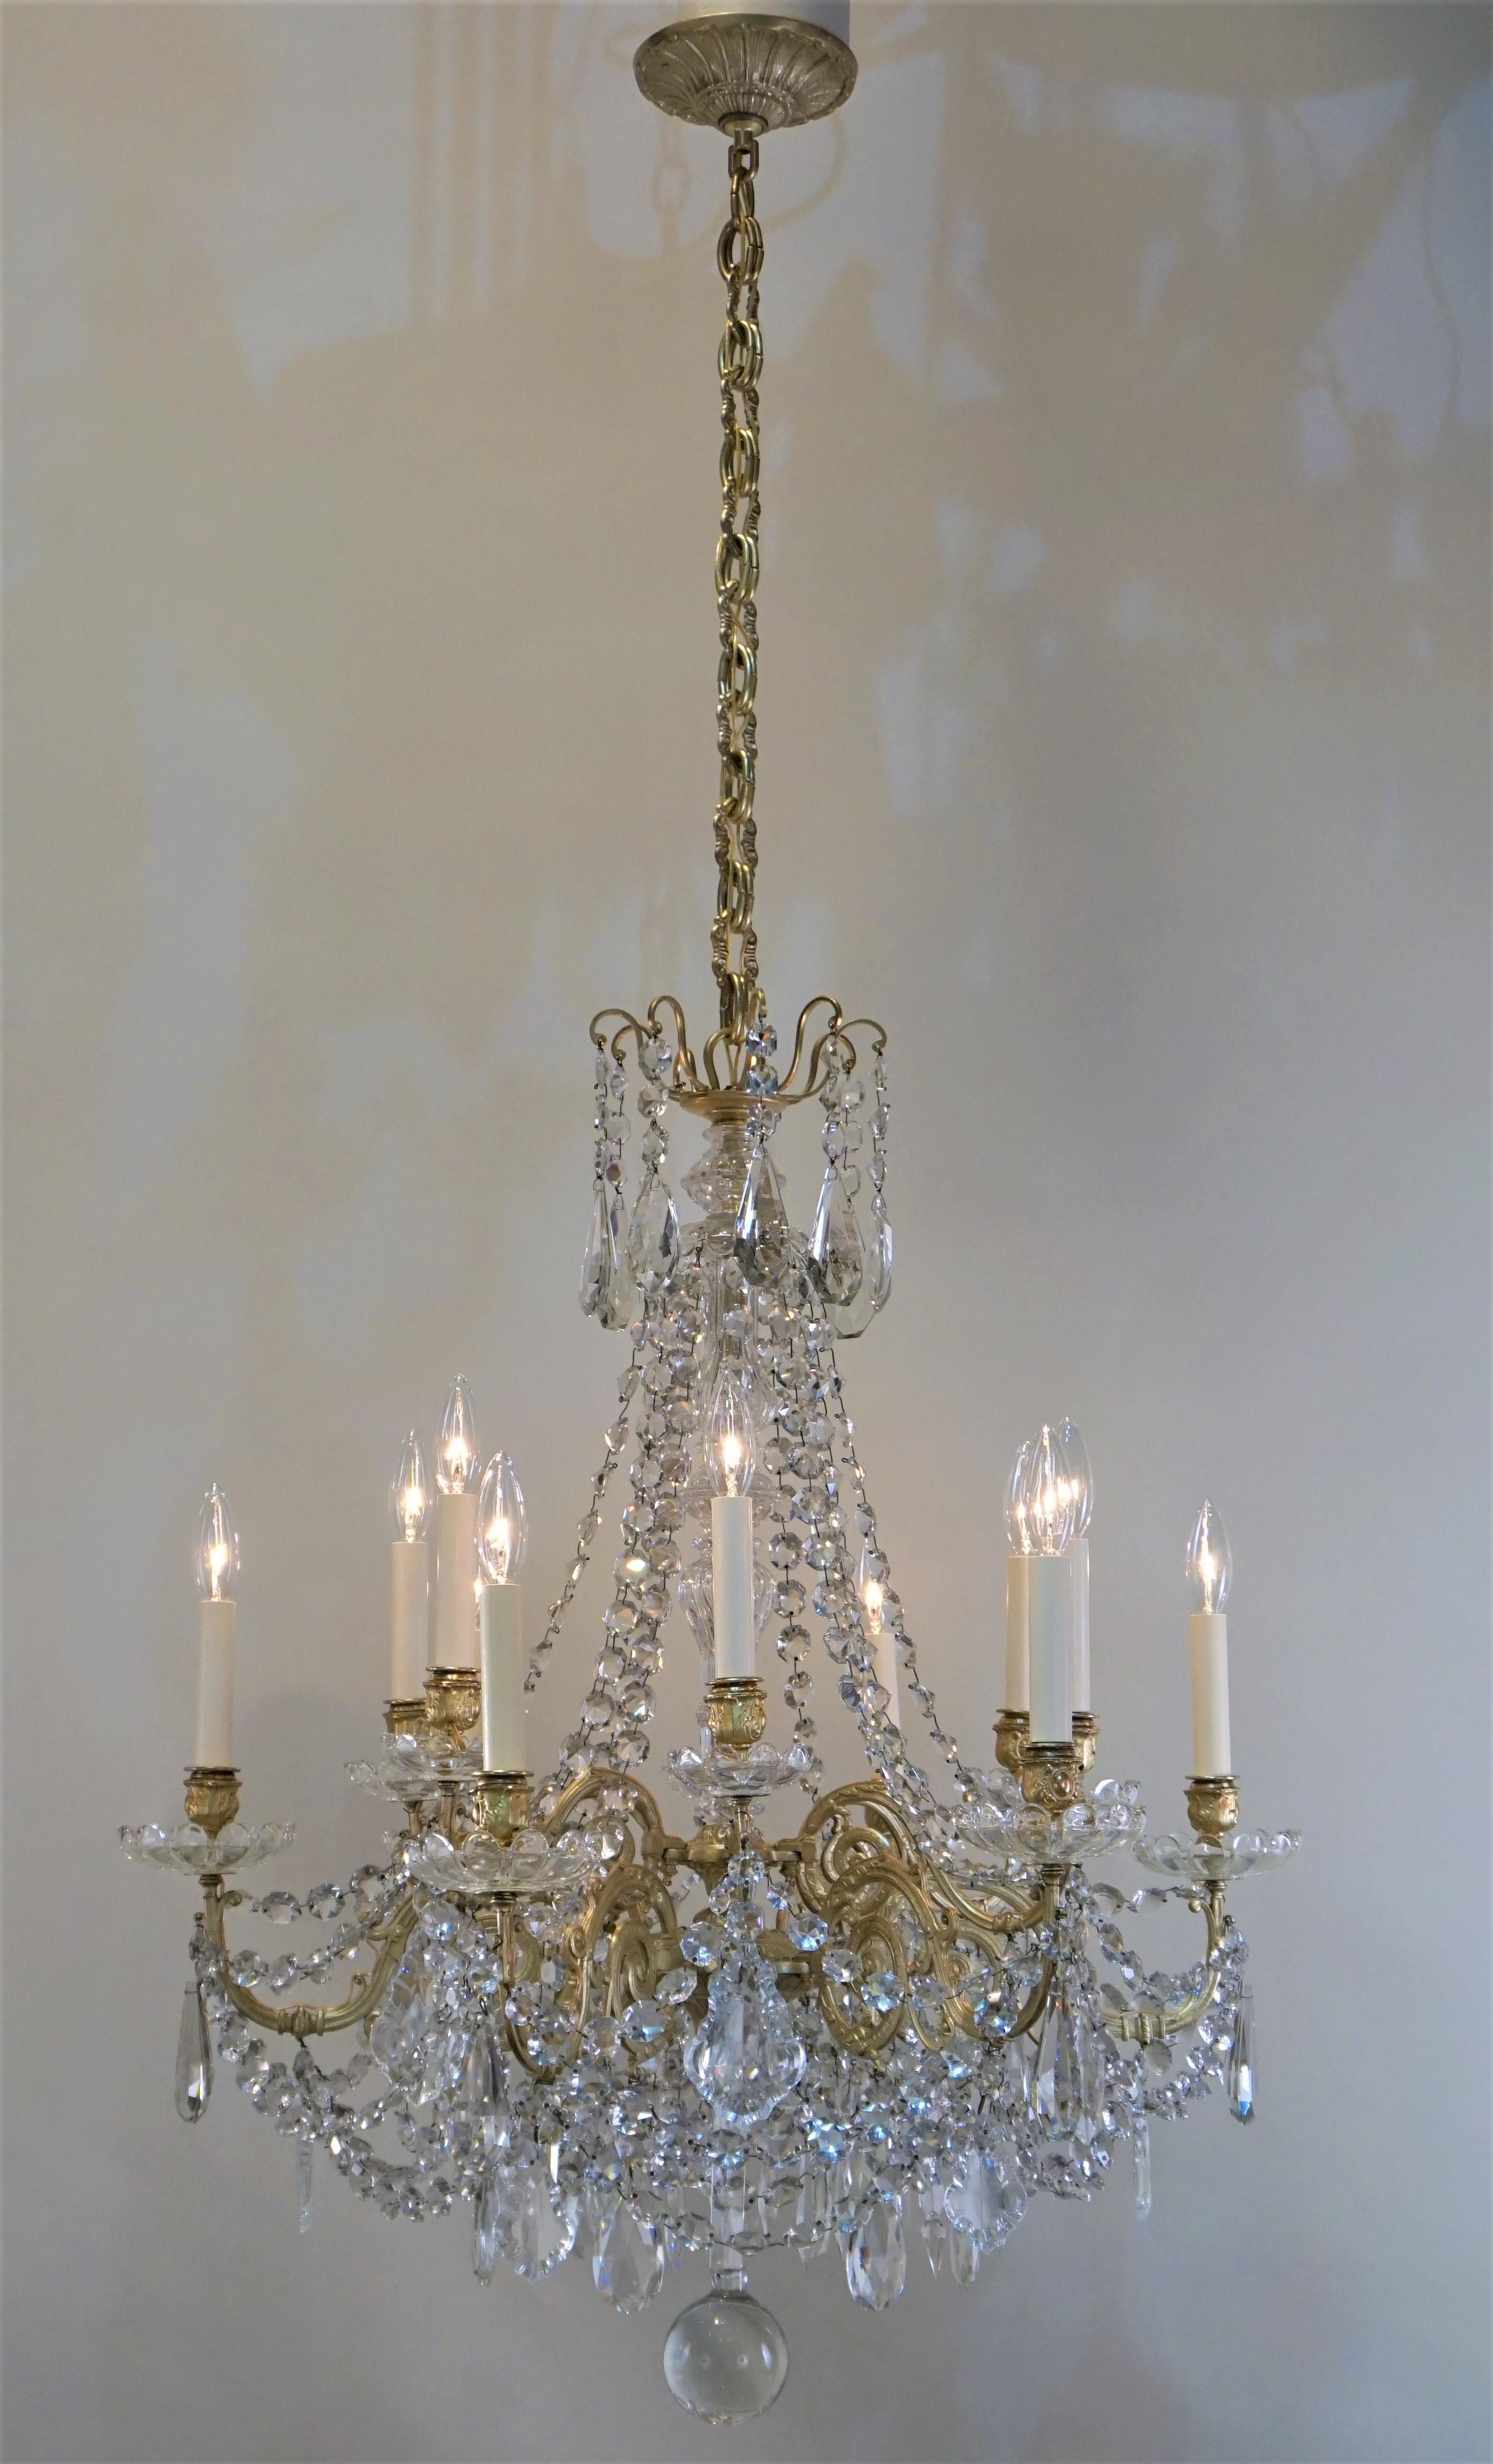 19th century electrified twelve light crystal and bronze French chandelier.
Measurement 29